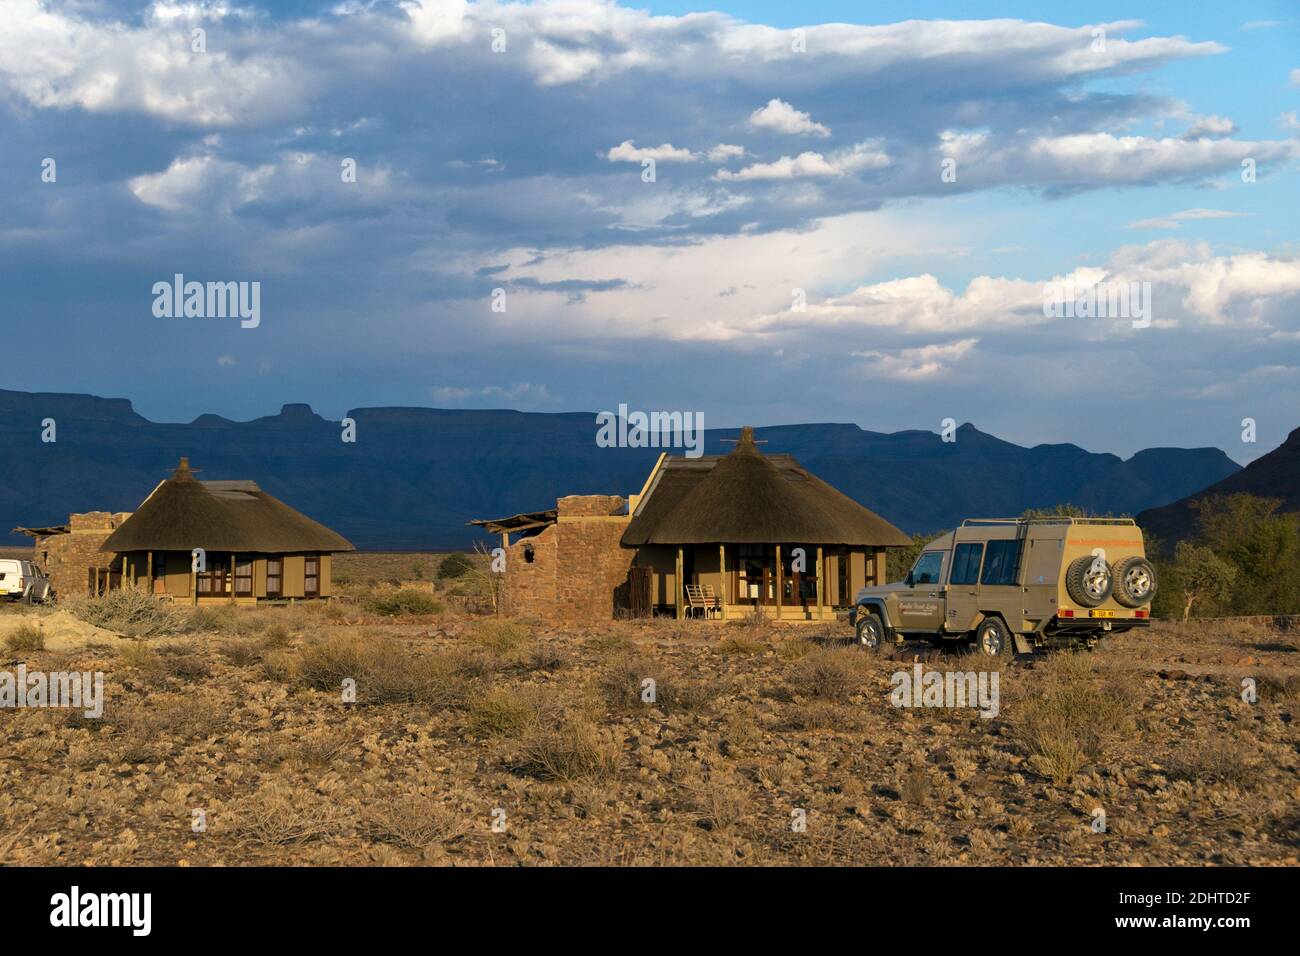 Luxury rondavels (private chalets) at a desert lodge near the famous red sand-dunes of Sossusvlei inside the Namib-Naukluft Park, Namibia. Stock Photo